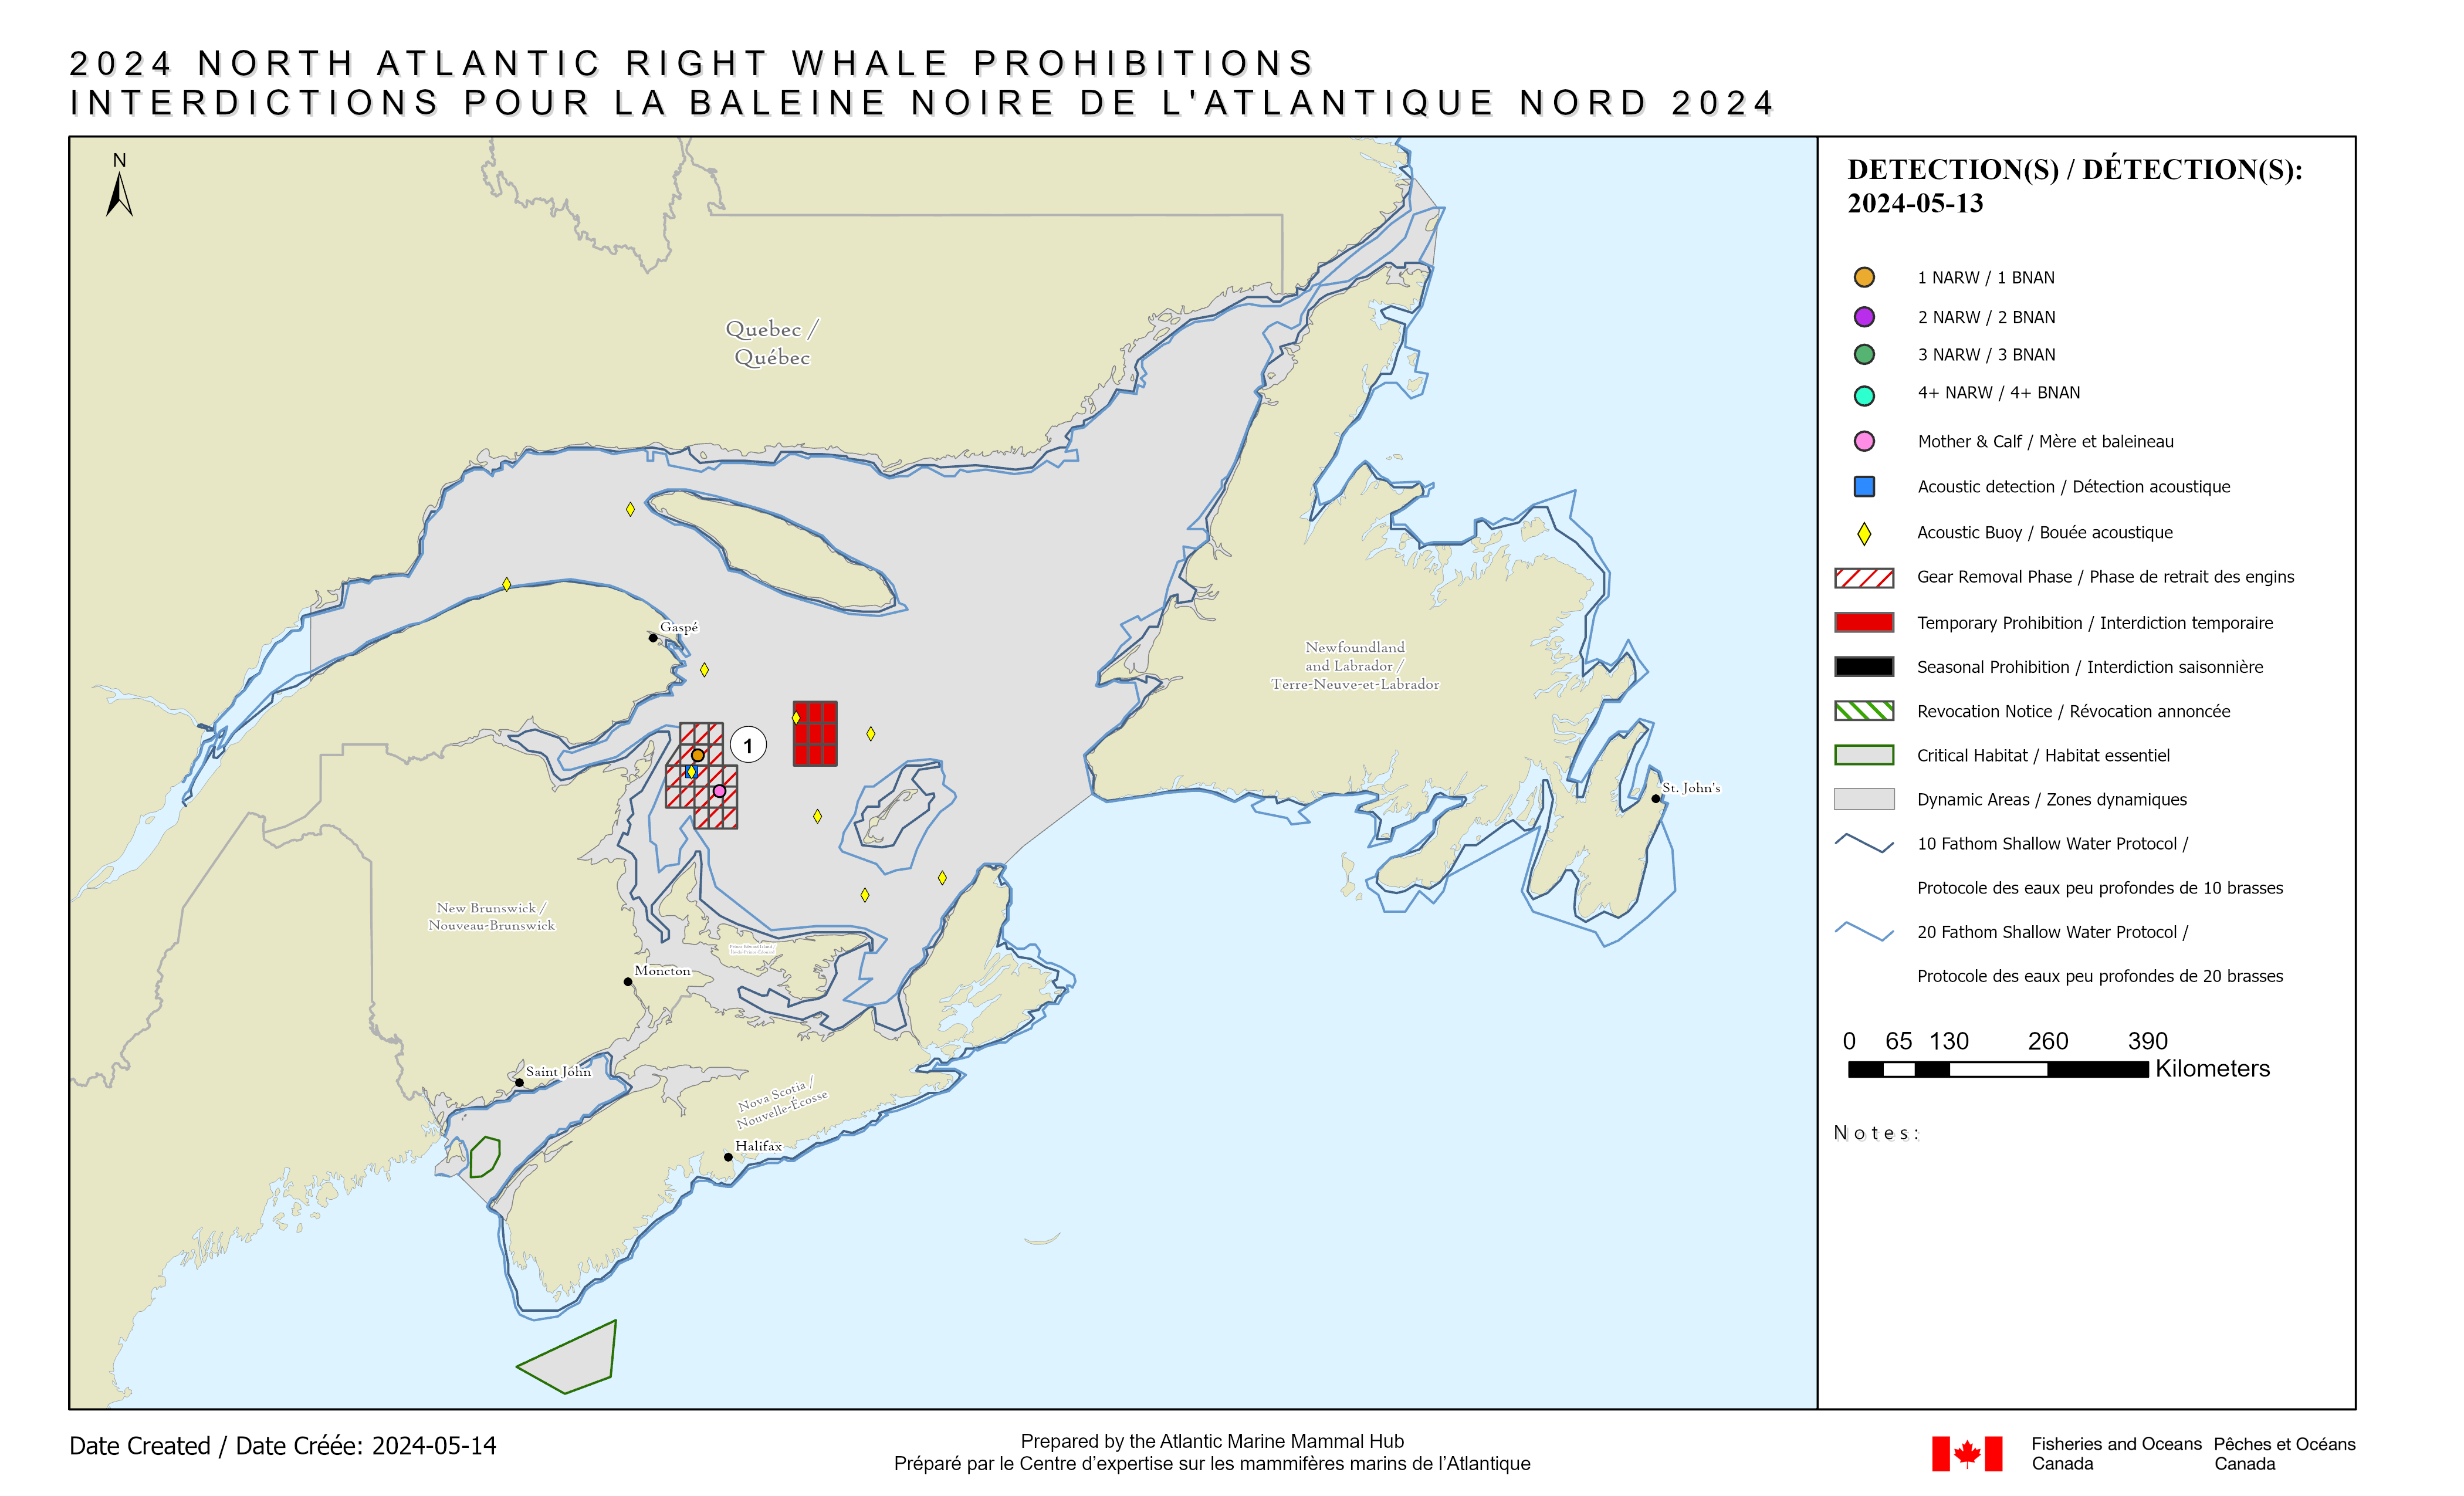 More Than a Dozen Additional Temporary Grid Closures Announced for Gulf of St. Lawrence